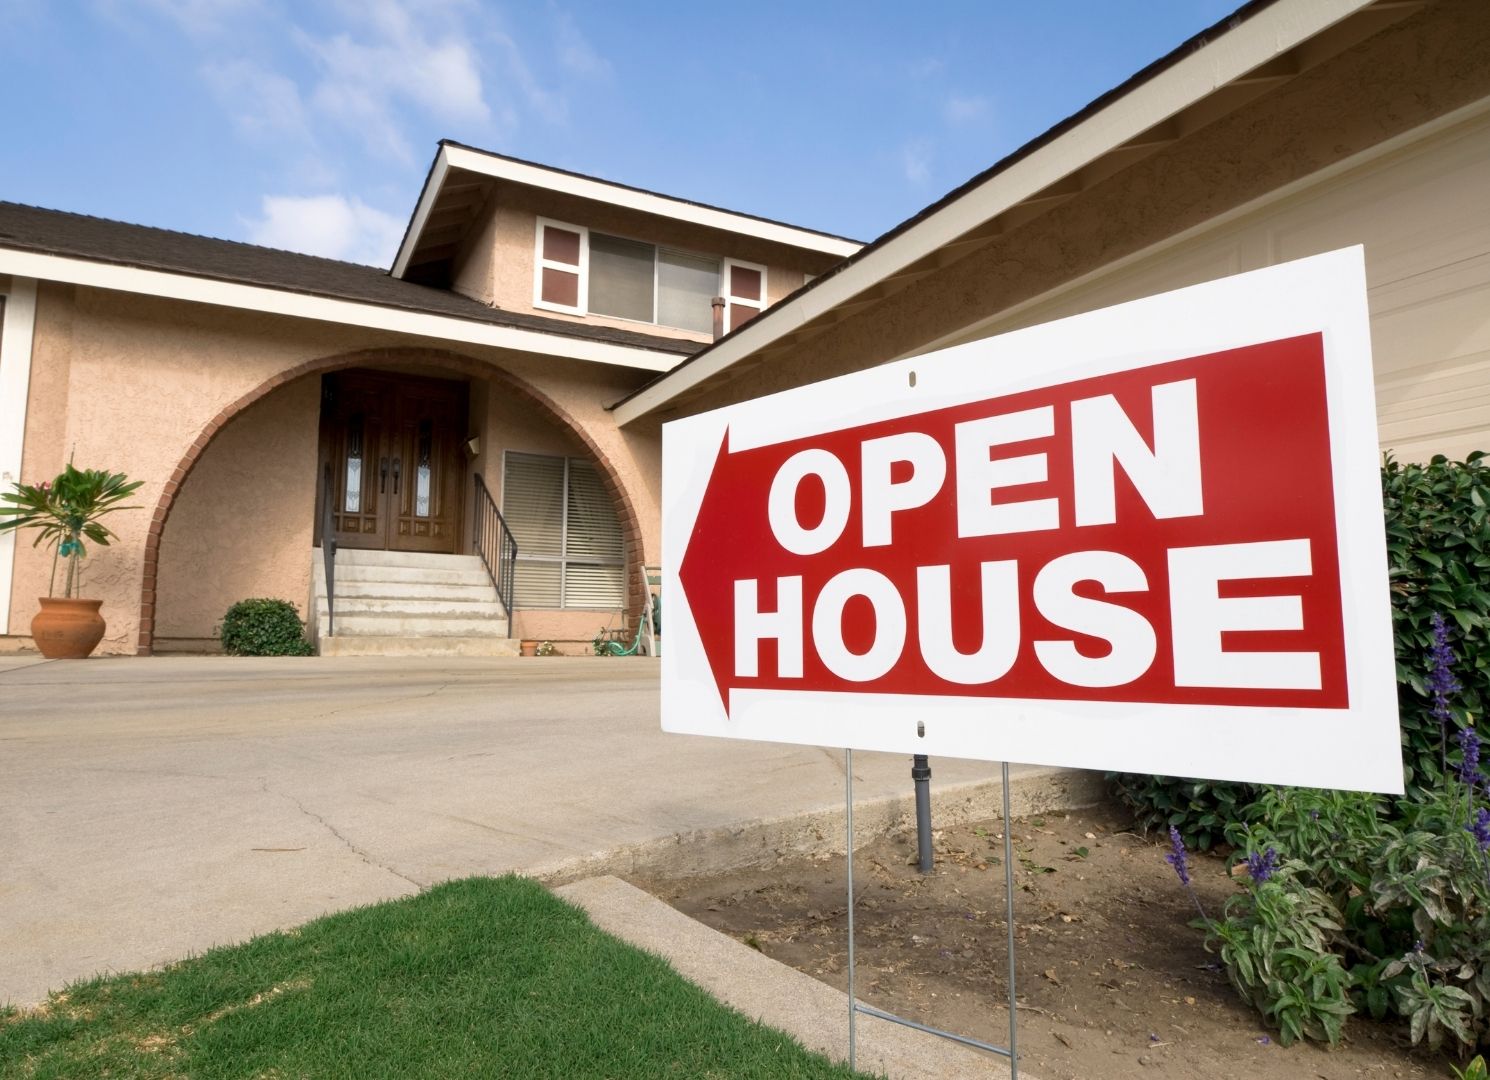 Why Go To Open Houses Even If You Don't Want To Move?